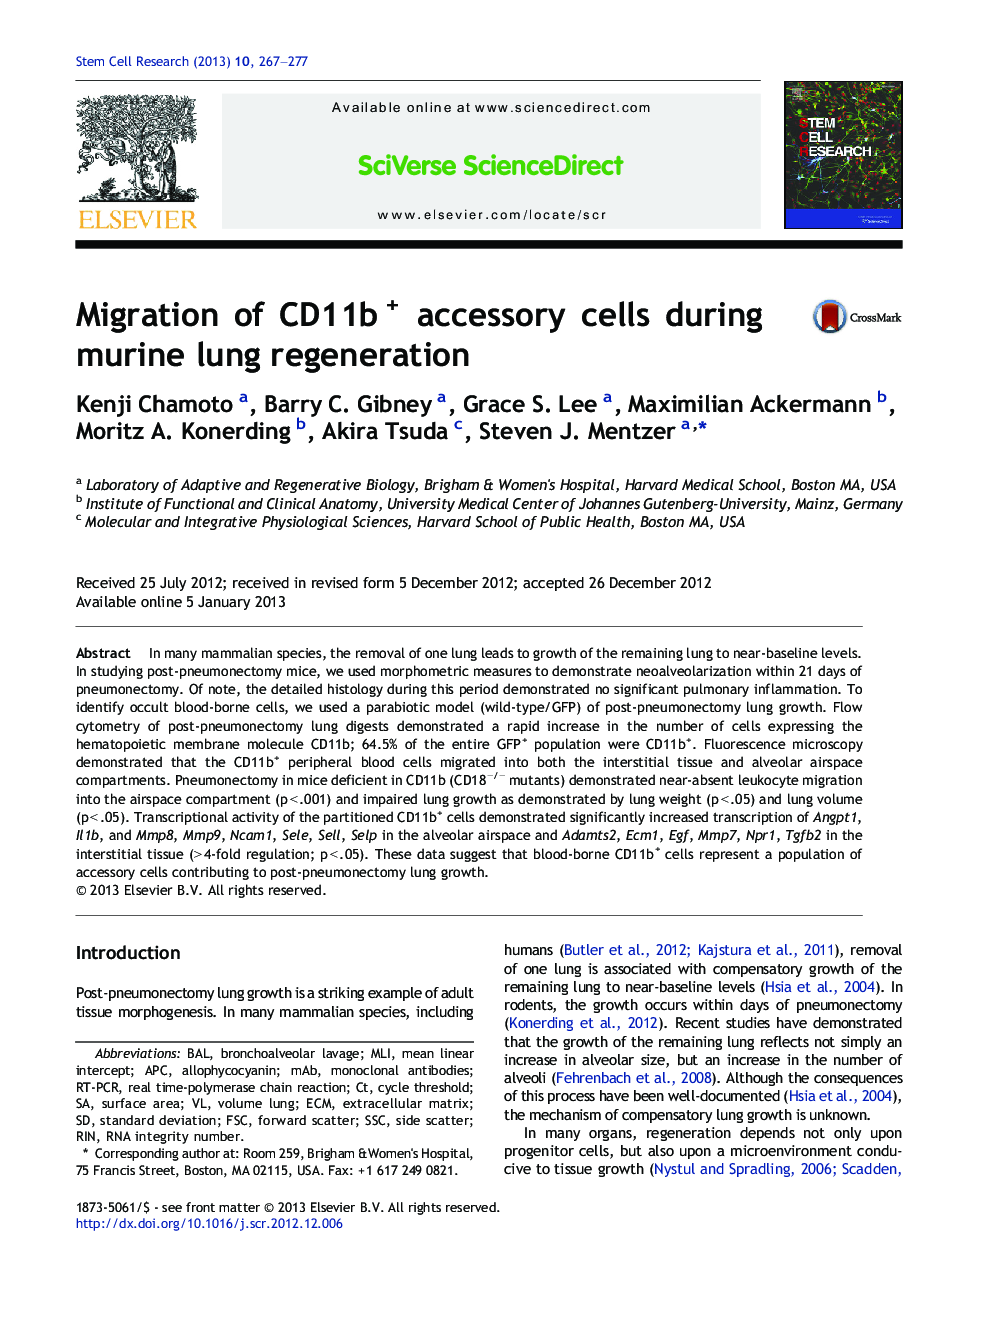 Migration of CD11b+ accessory cells during murine lung regeneration